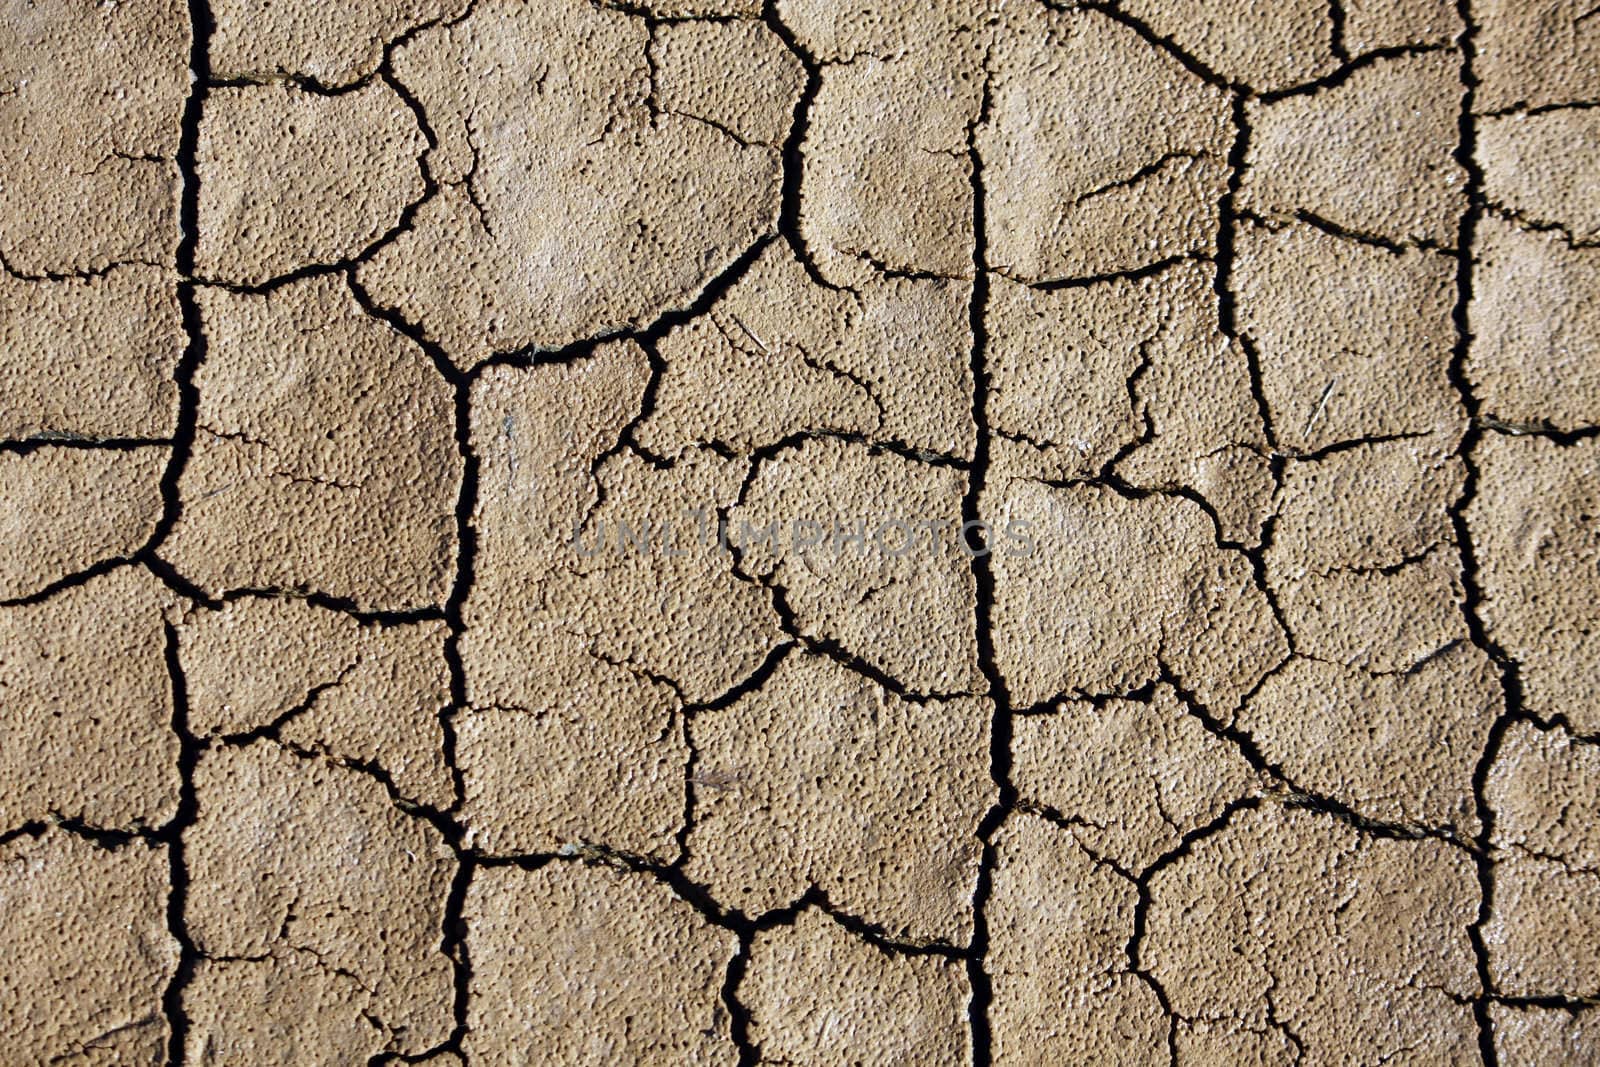 Close texture view of some dried out ground with many cracks.